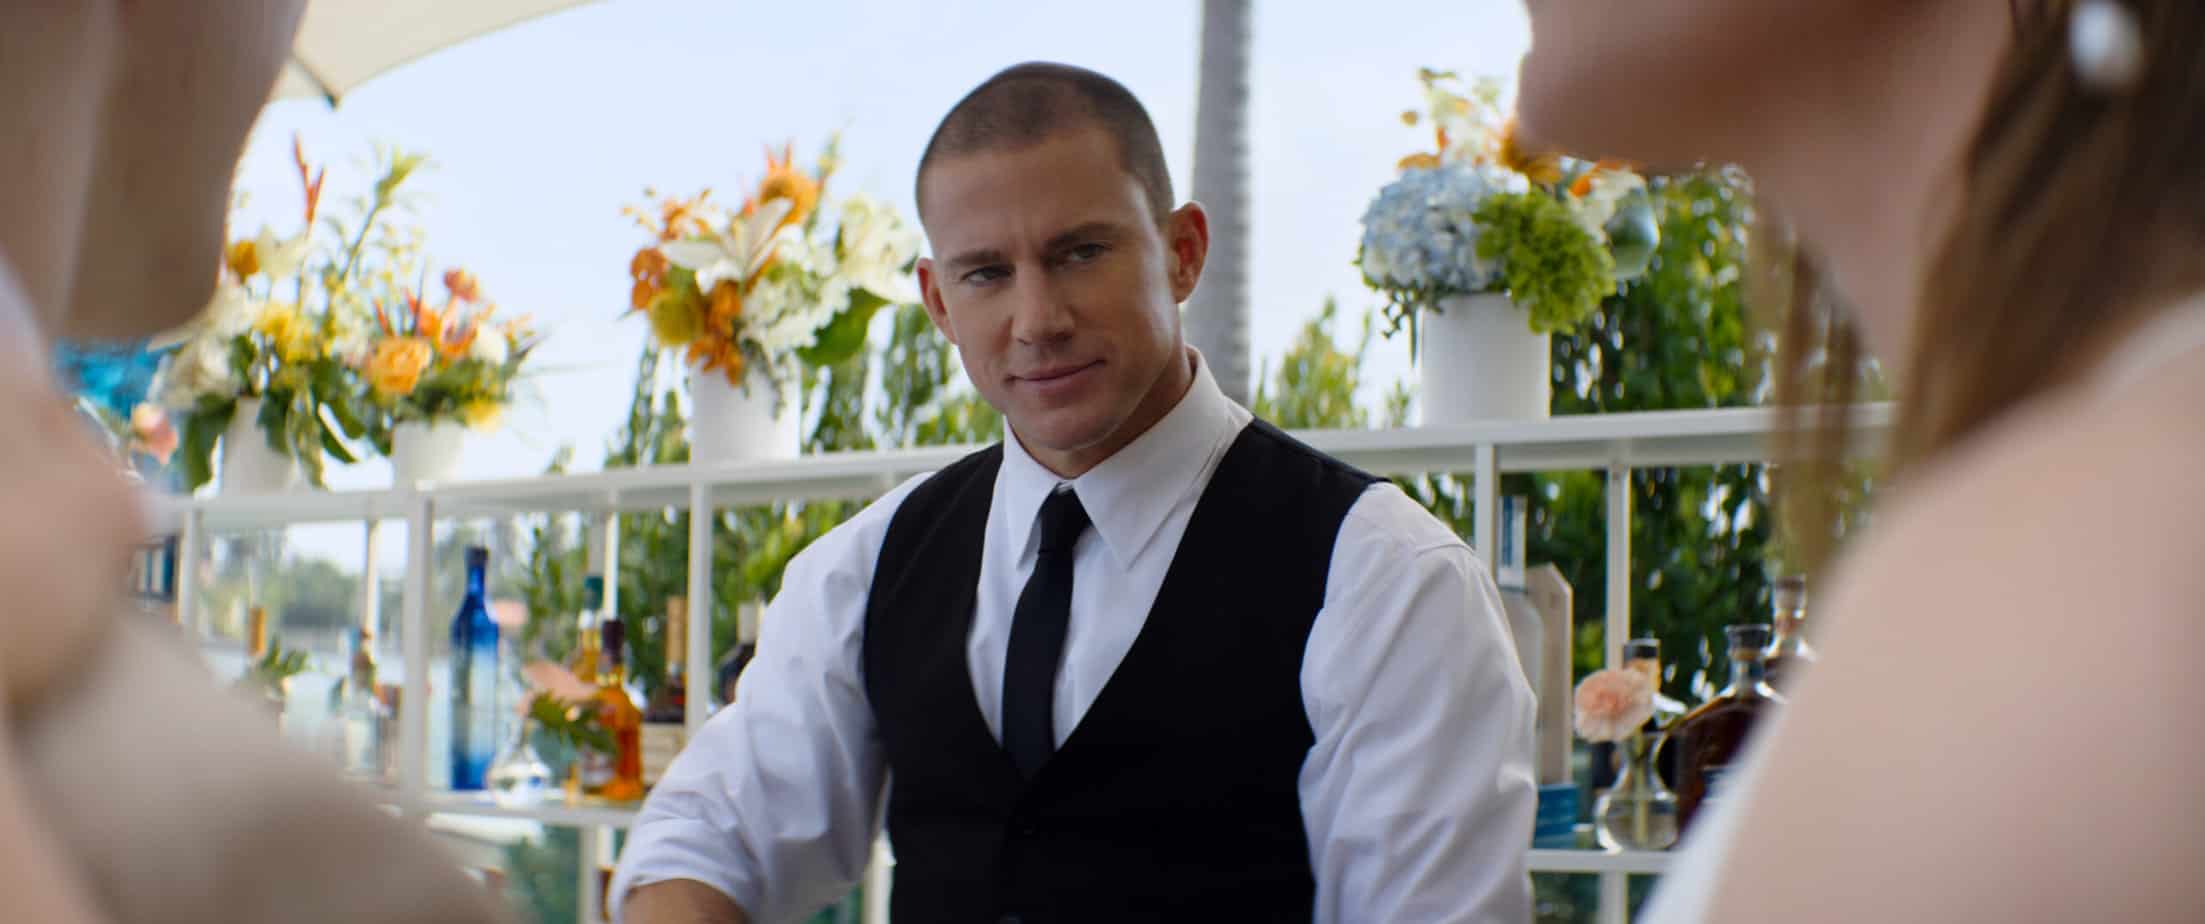 quotes from magic mikes last dance. channing tatum in a bartender outfit.